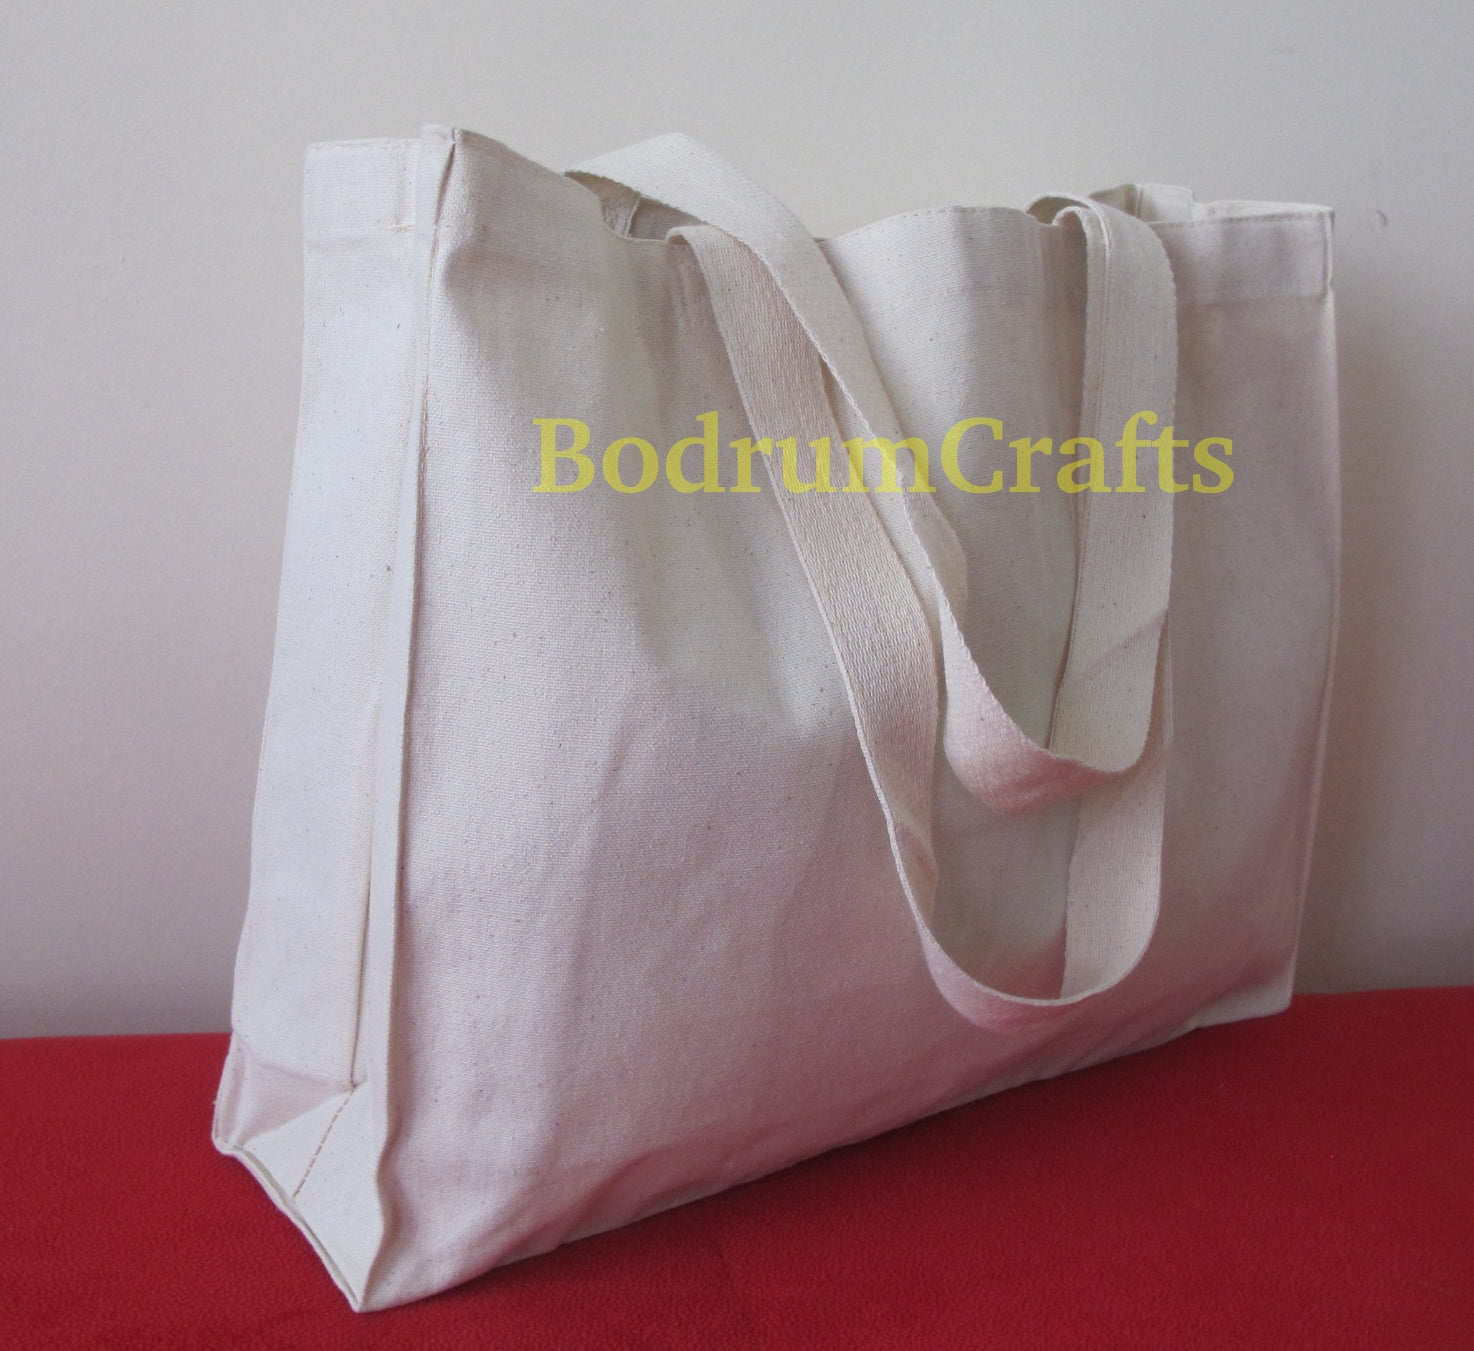 Wholesale Rectangular Heavy Canvas Tote Bags, Full Gusset Grocery Shopper Totes in Bulk